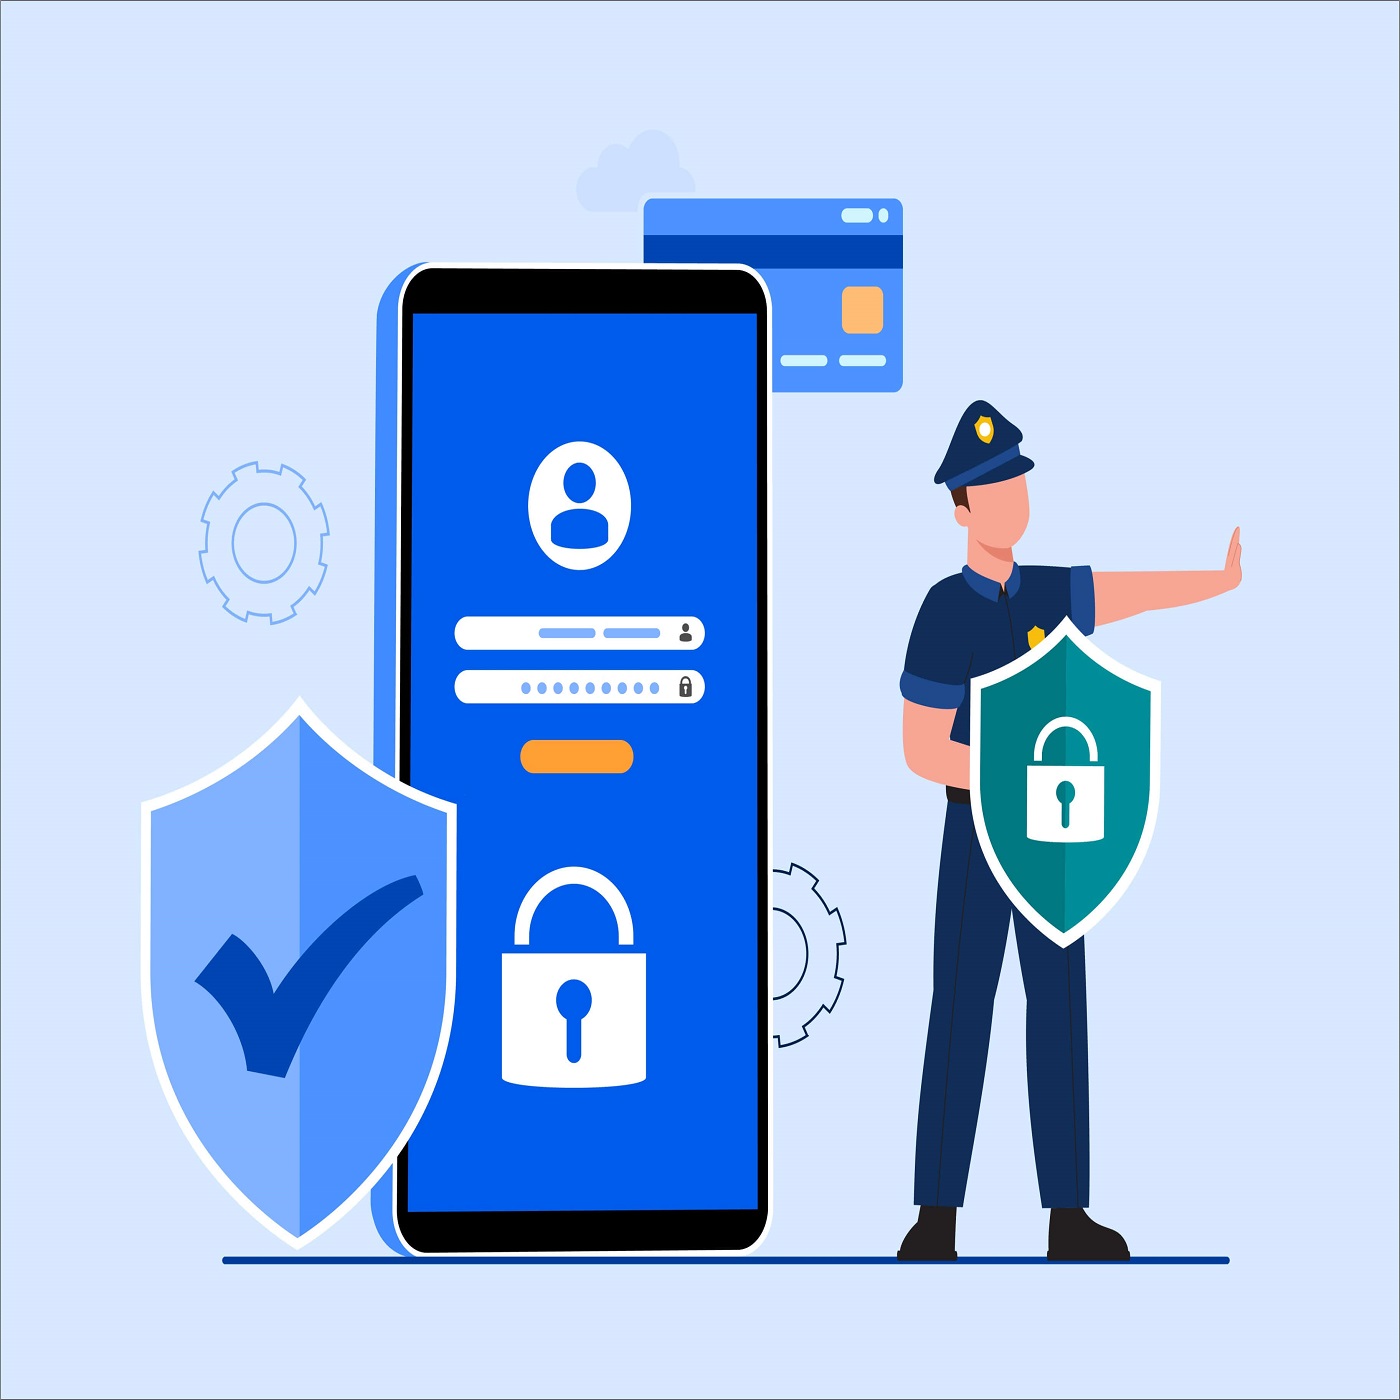 App Security Matters: Protecting Your Mobile Data